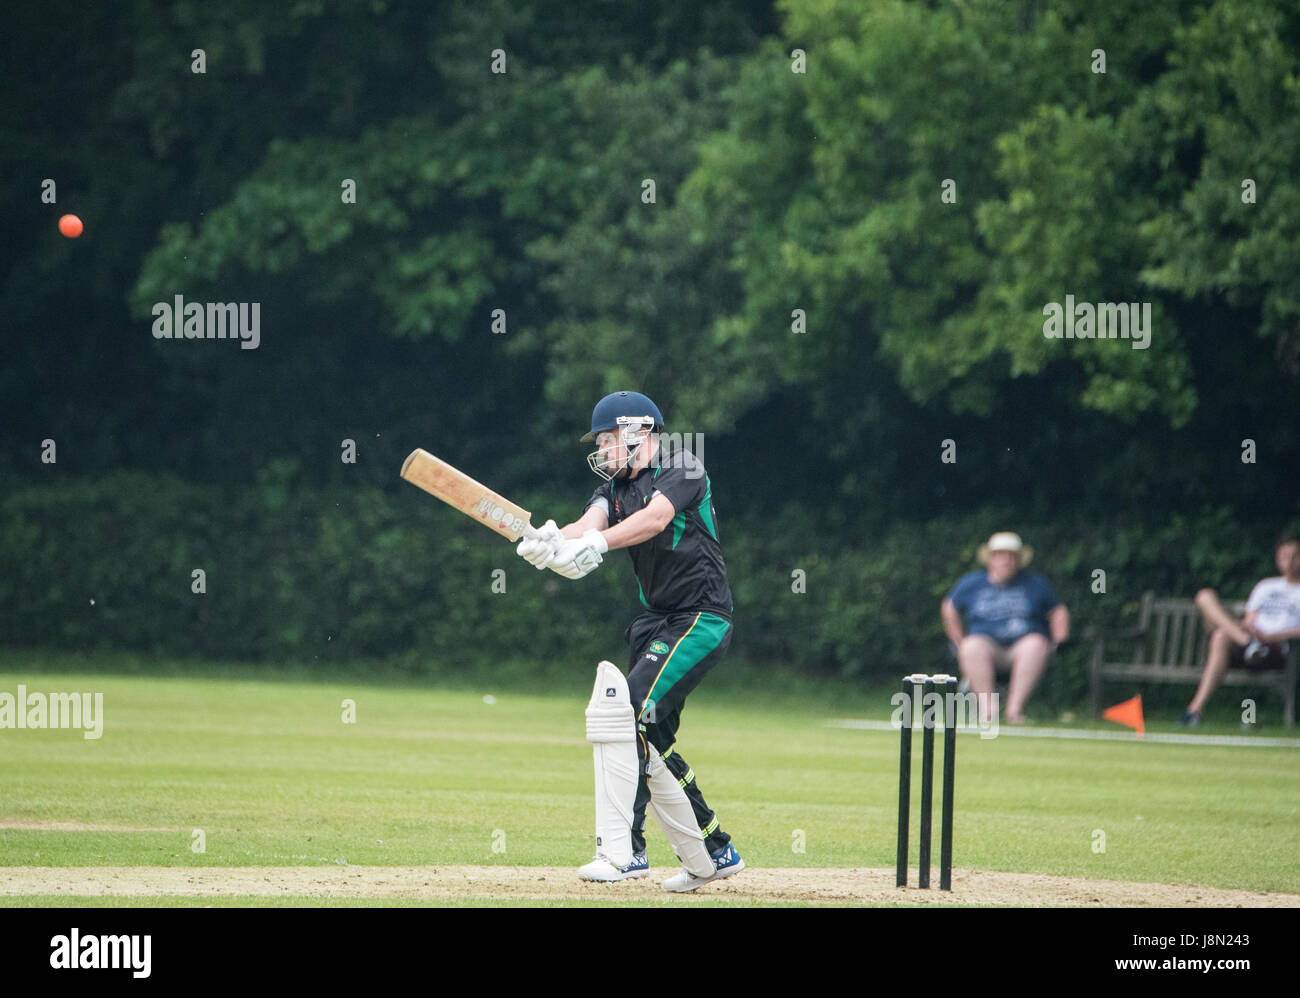 Brentwood, Essex, 29th May 2017. T20 Cricket match Brentwood Buccaneers vs Harold Wood at the Old County Ground, Brentwood, Brentwood won by 10 wickets T20 Cricket match Brentwood Buccaneers vs Harold Wood at the Old County Ground, Brentwood, Brentwood won by 10 wickets Credit: Ian Davidson/Alamy Live News Stock Photo